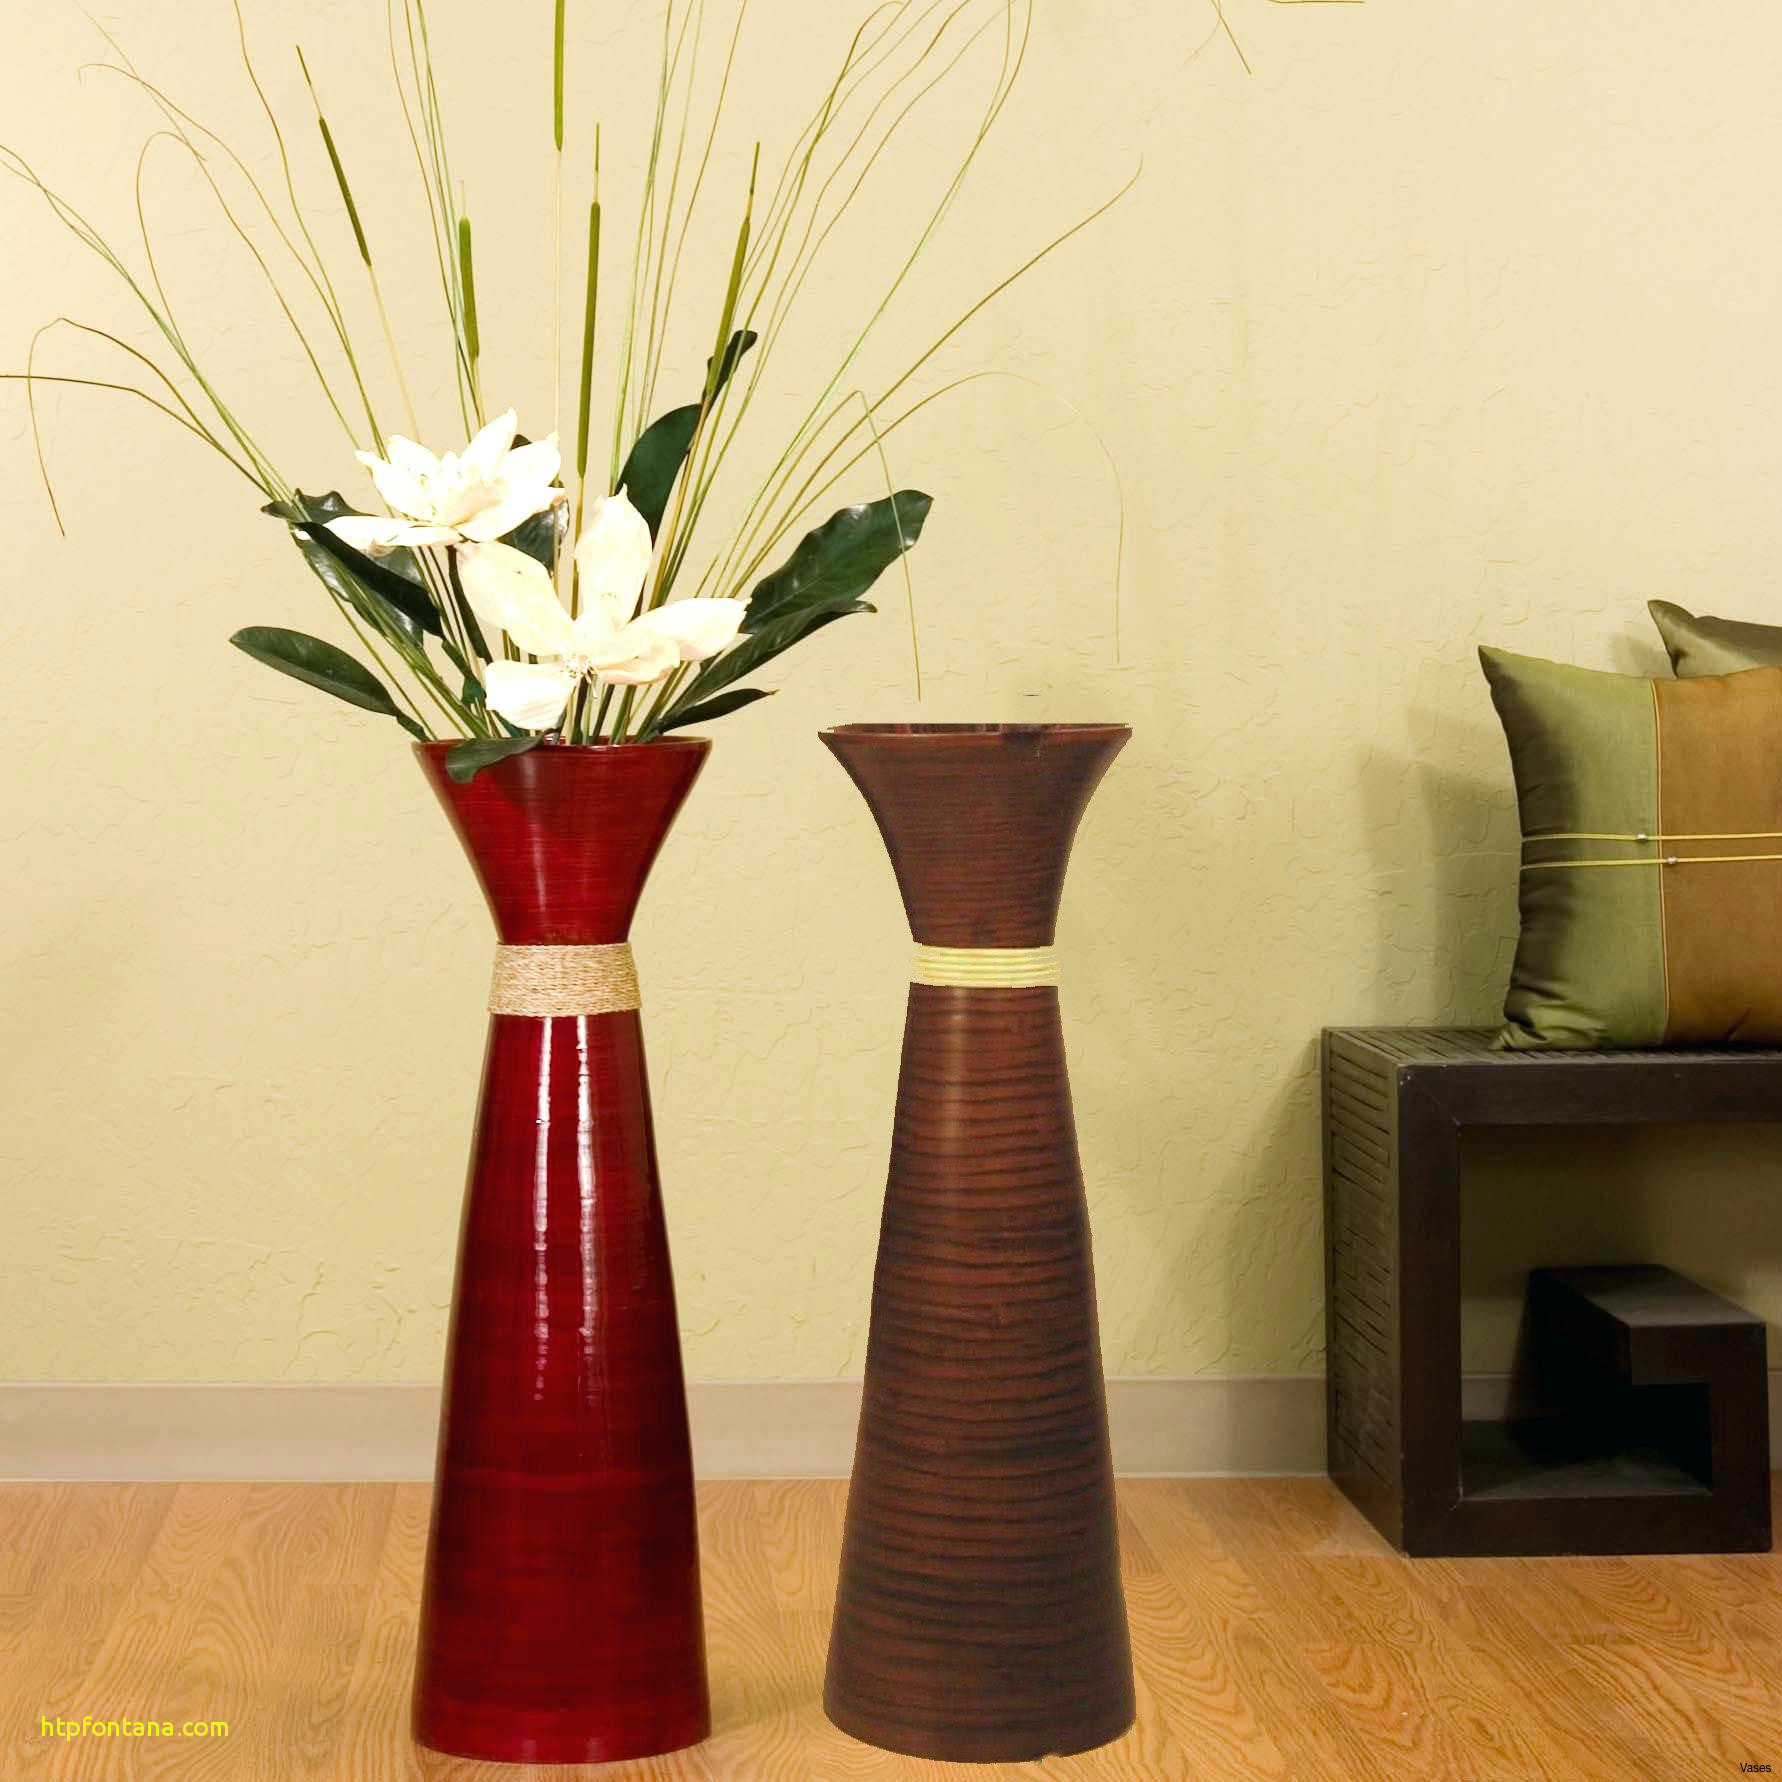 29 Nice Floor Vase with Sticks 2024 free download floor vase with sticks of floor vase with sticks collection vases vase with sticks red in a i in floor vase with sticks image living room decor vases best decorative colorful red sticks in a